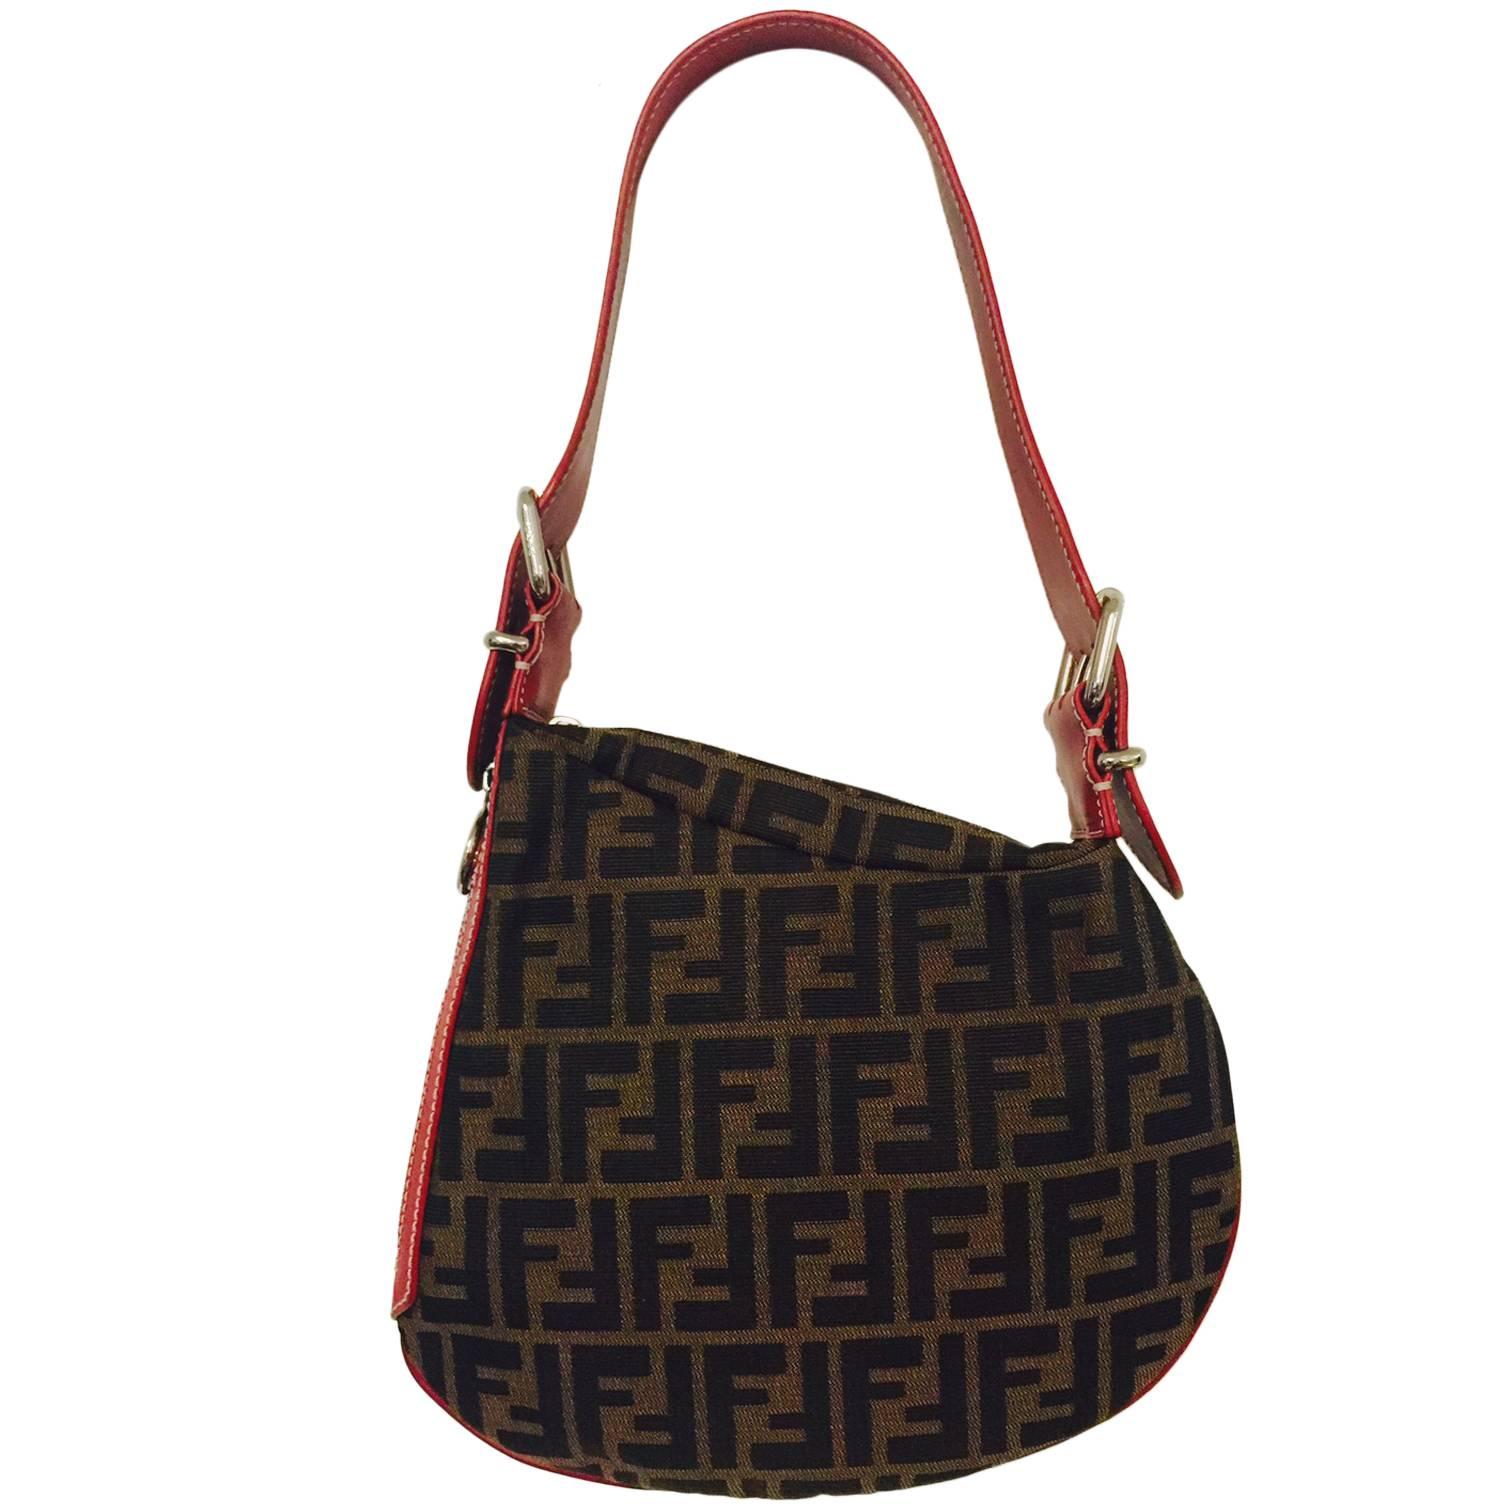 Fendi Brown & Tan Zucca Canvas Oyster Hobo W. Red Leather Shoulder Strap